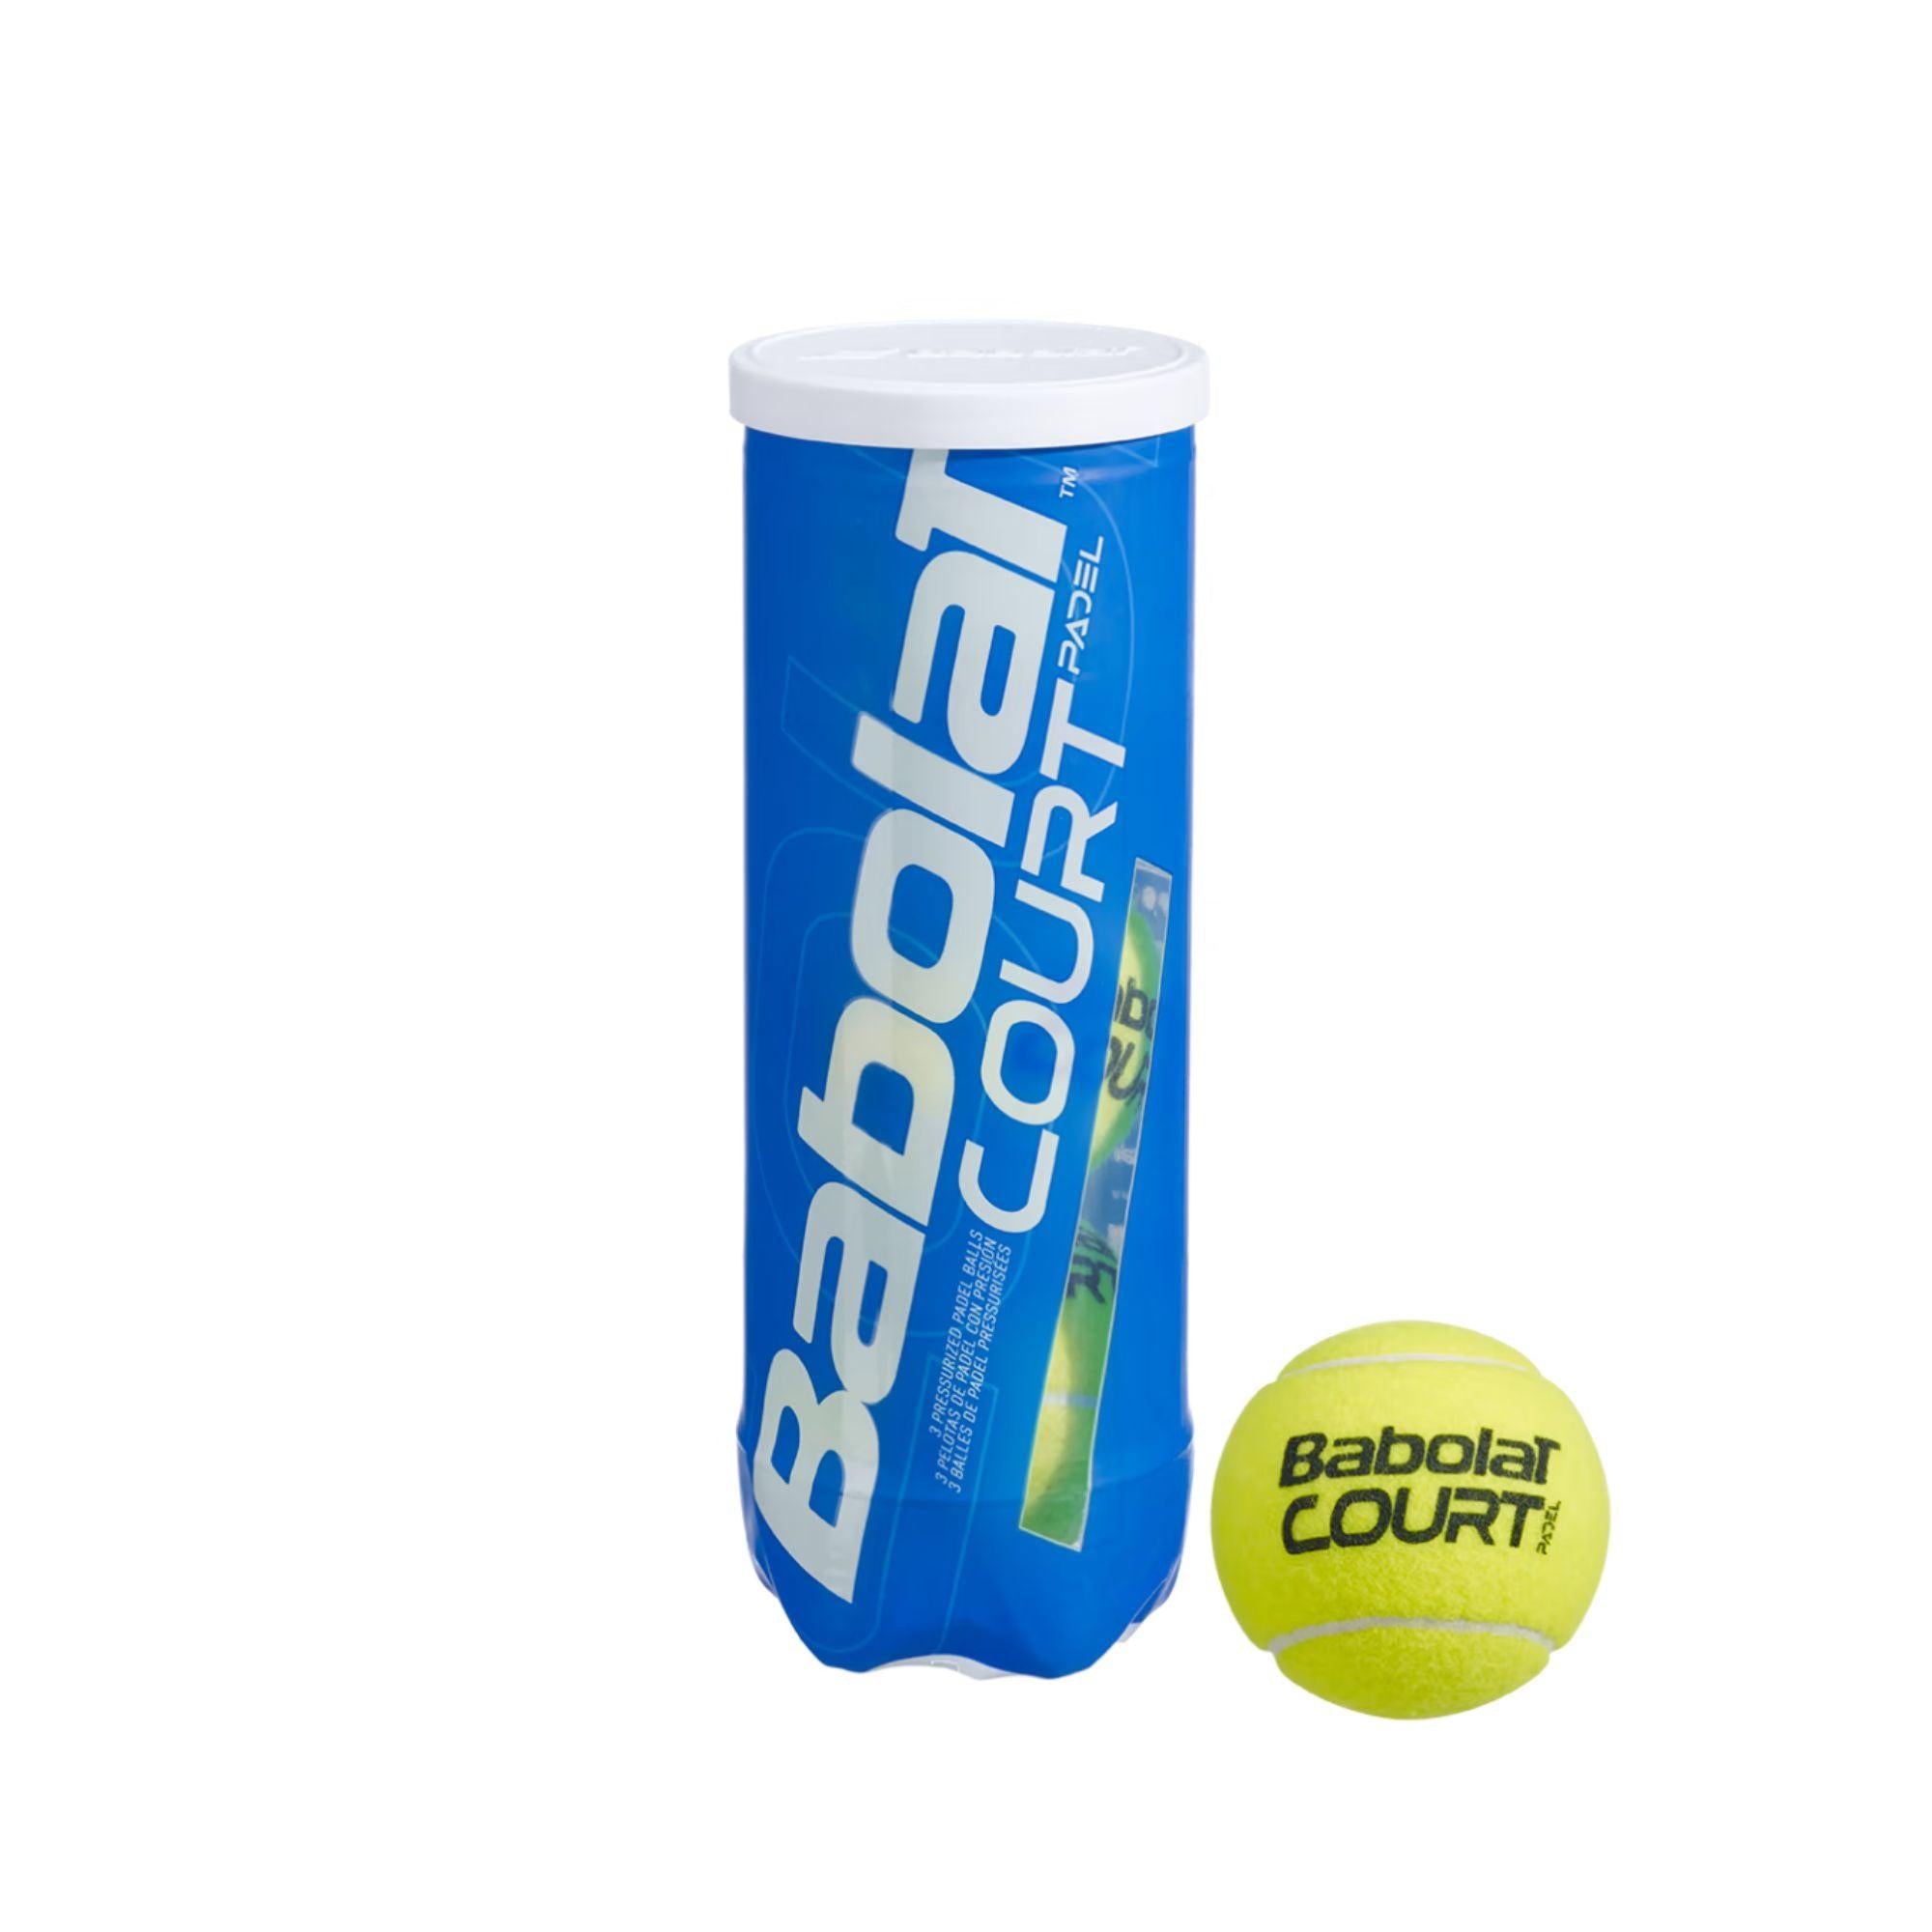 Babolat Court Padel Balls buy online for sale padelx south africa